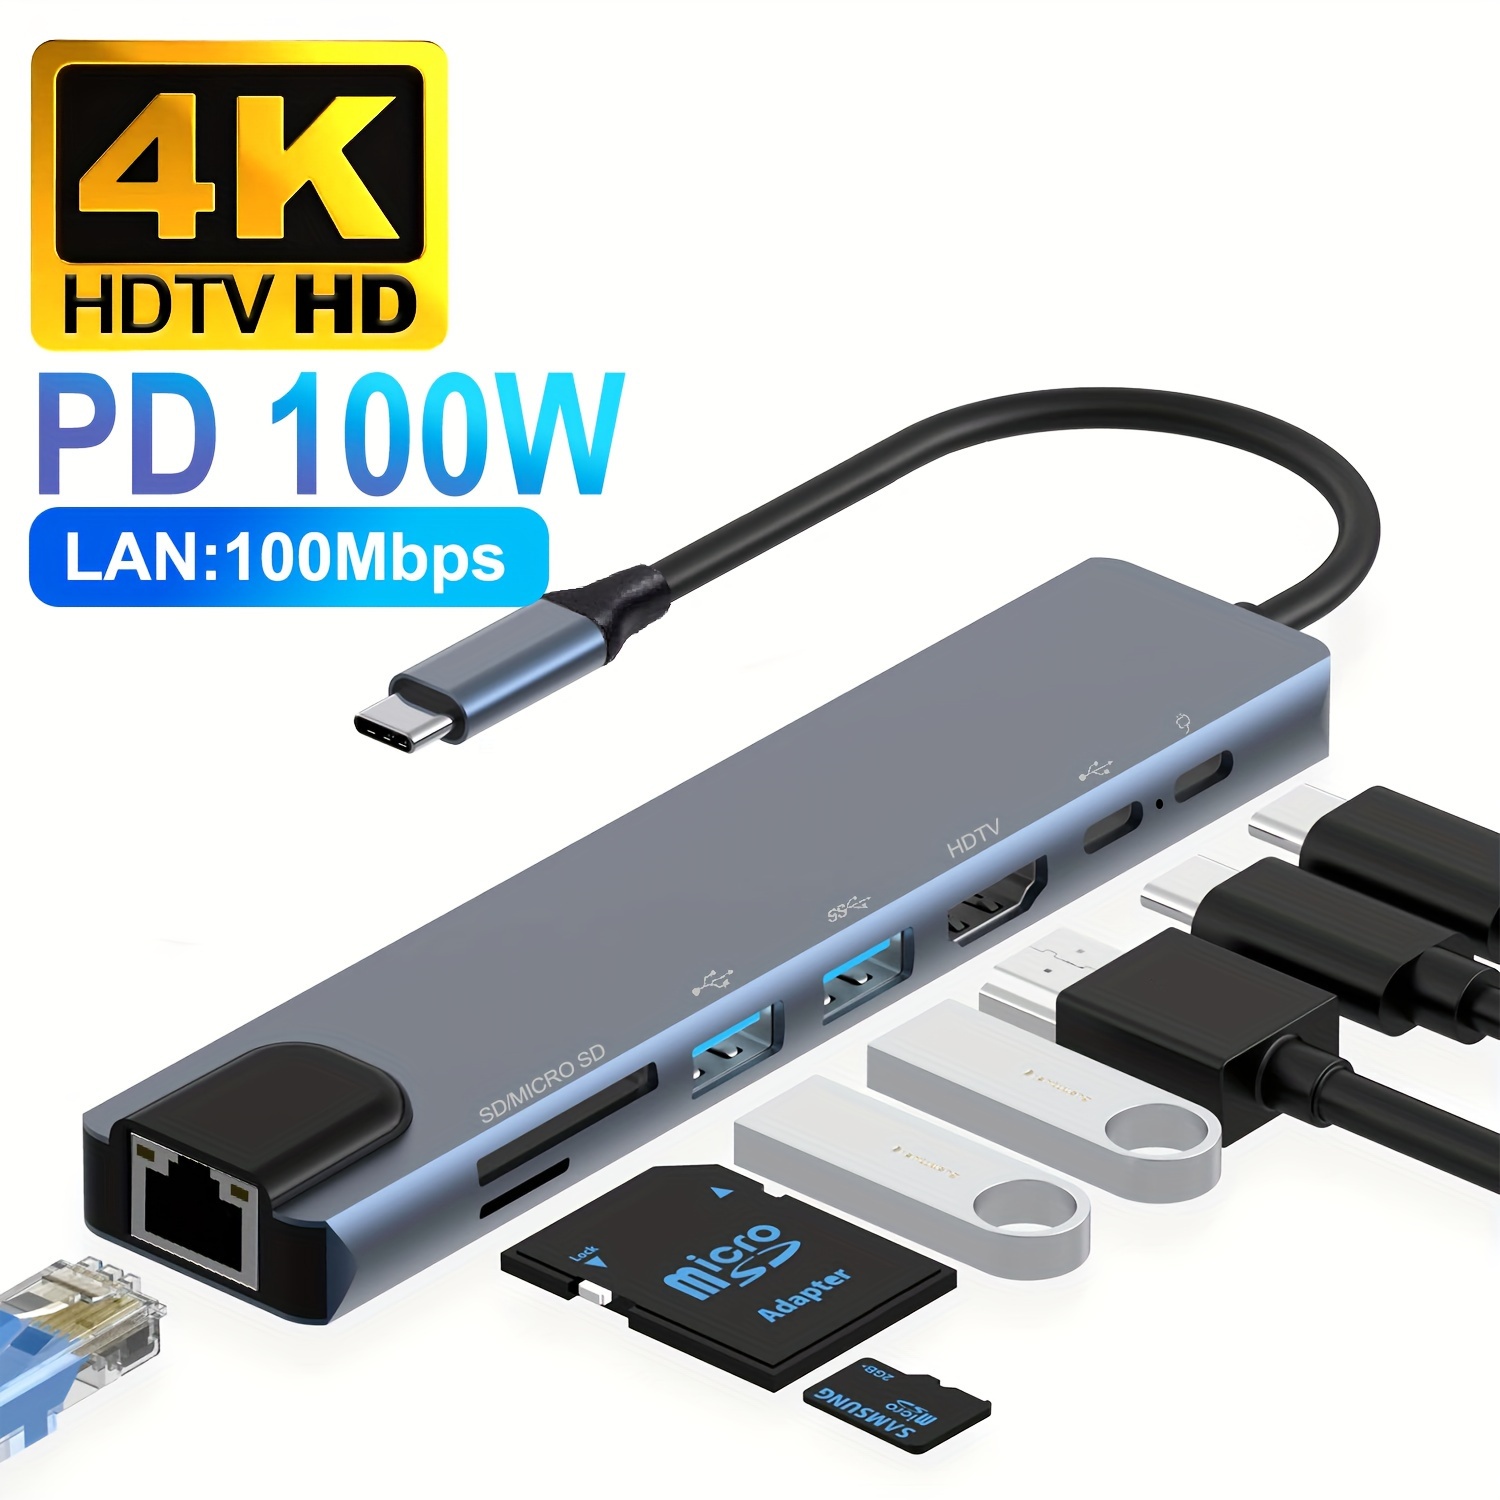 High Quality 8 In 1 Multiport Type C To Hd-mi + VGA + LAN Port + 2*USB 3.0  + SD/TF Card + Audio Port + USB-C Hub Cable Adapter